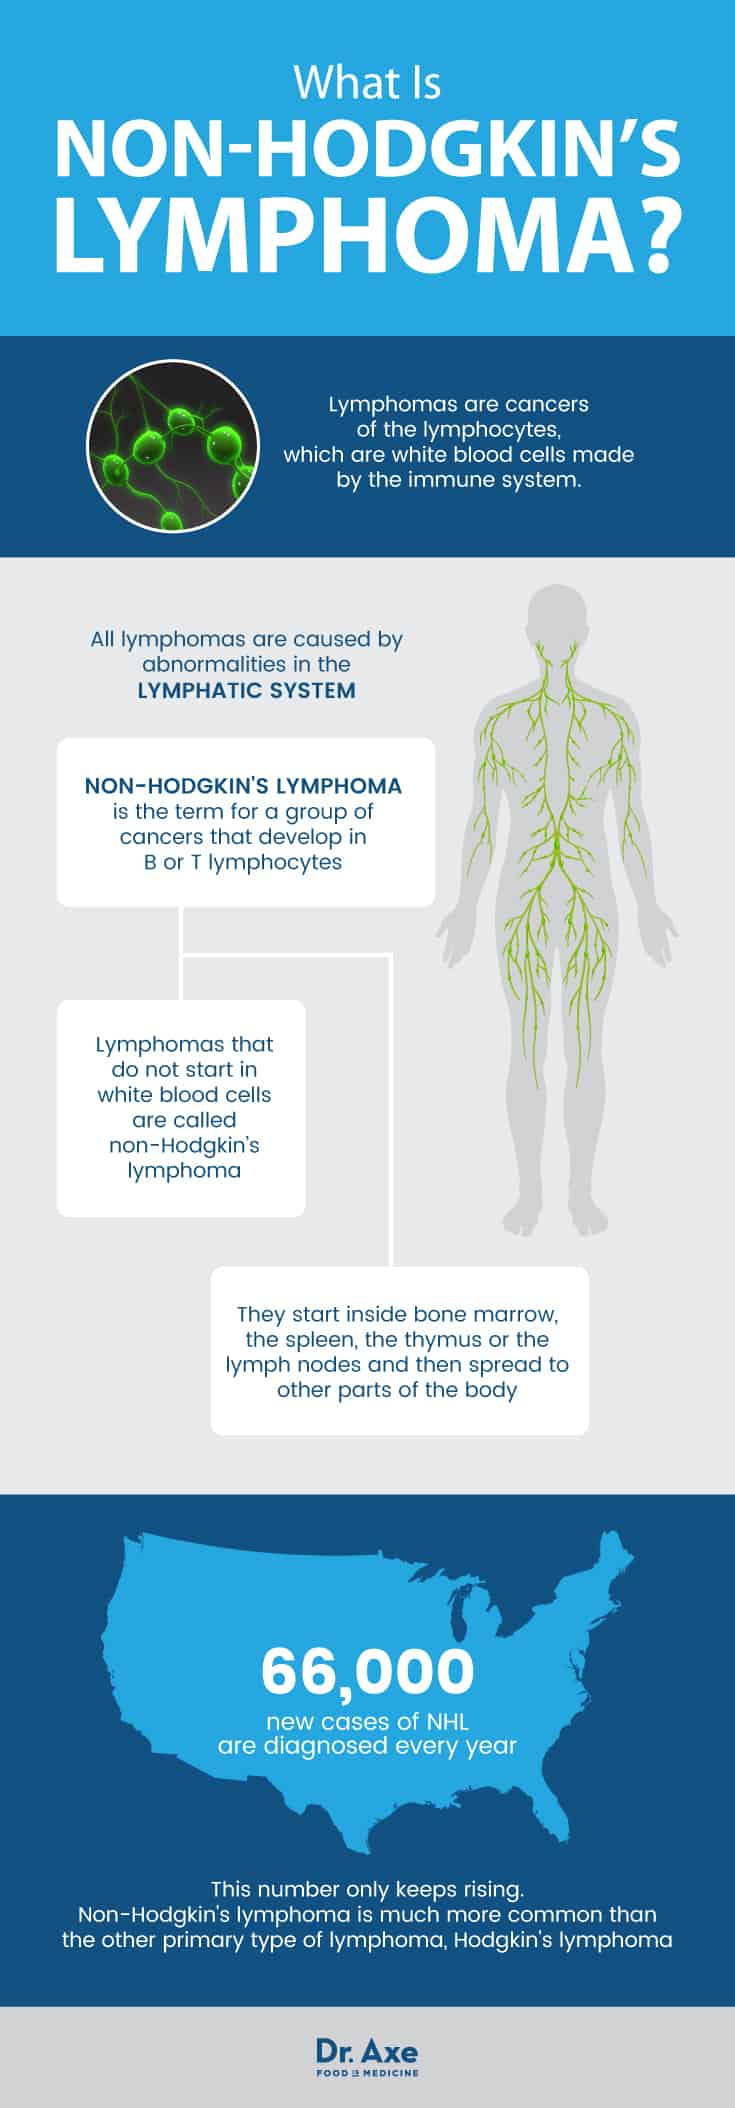 What is non-Hodgkins lymphoma? - Dr. Axe